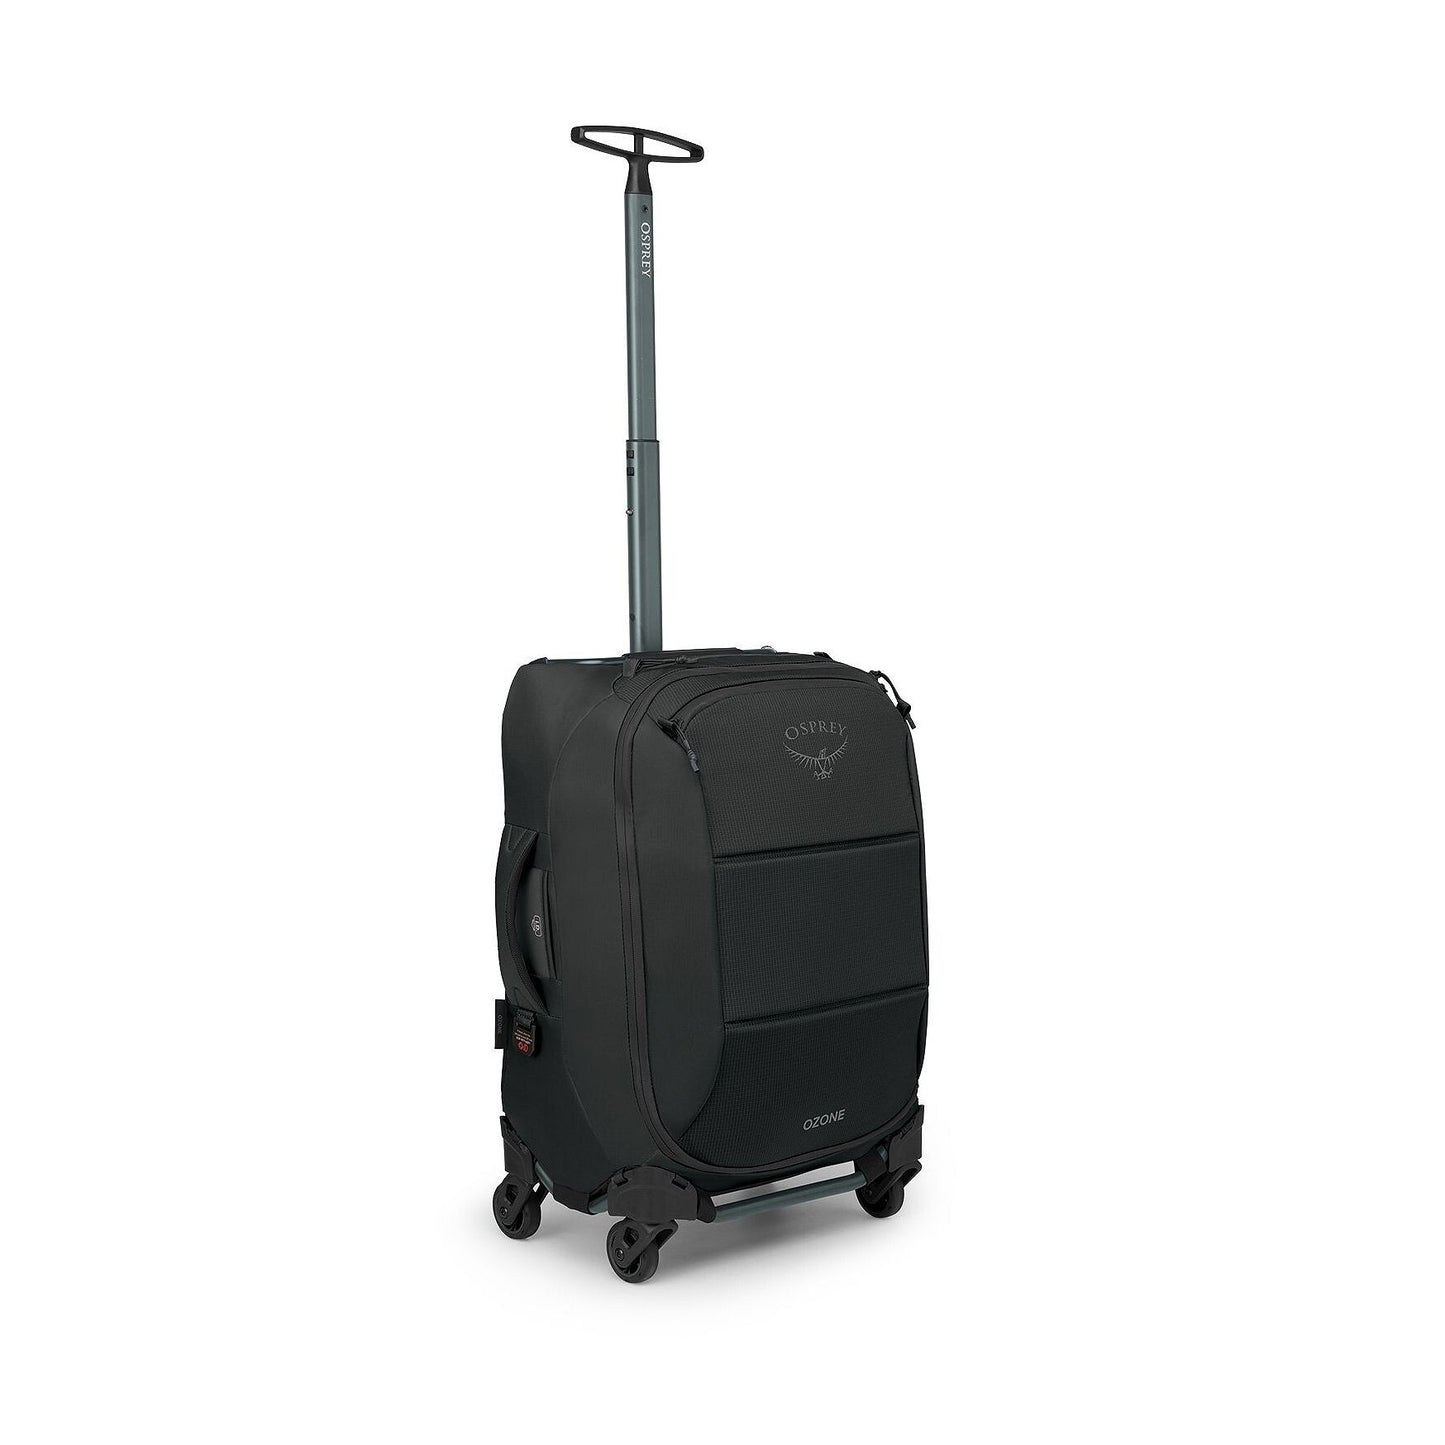 OZONE 4-WHEEL CARRY ON 38L/21.5INCH